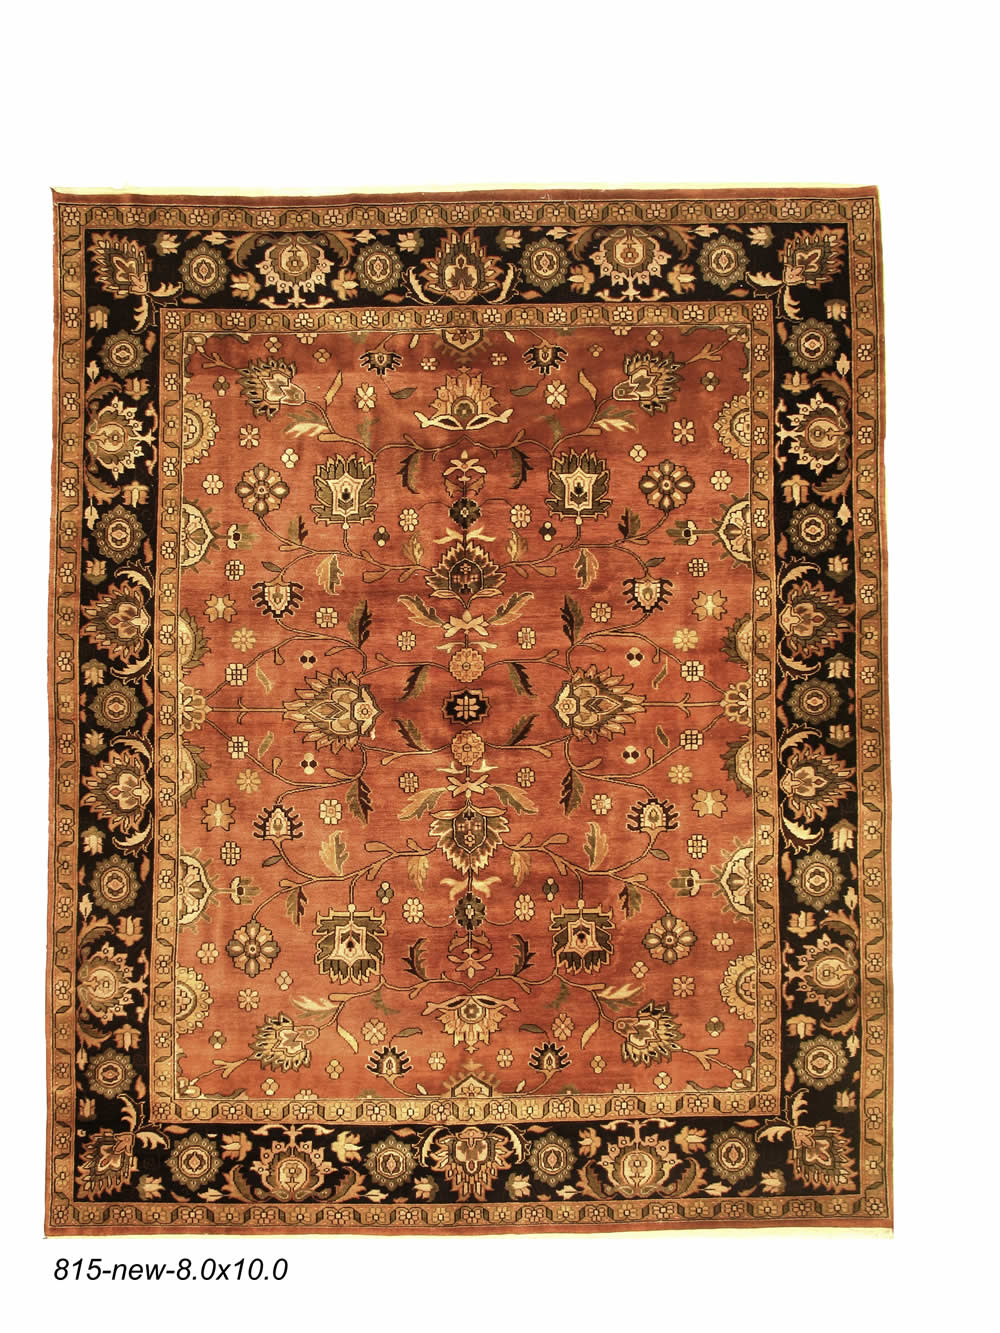 New Indian Rug